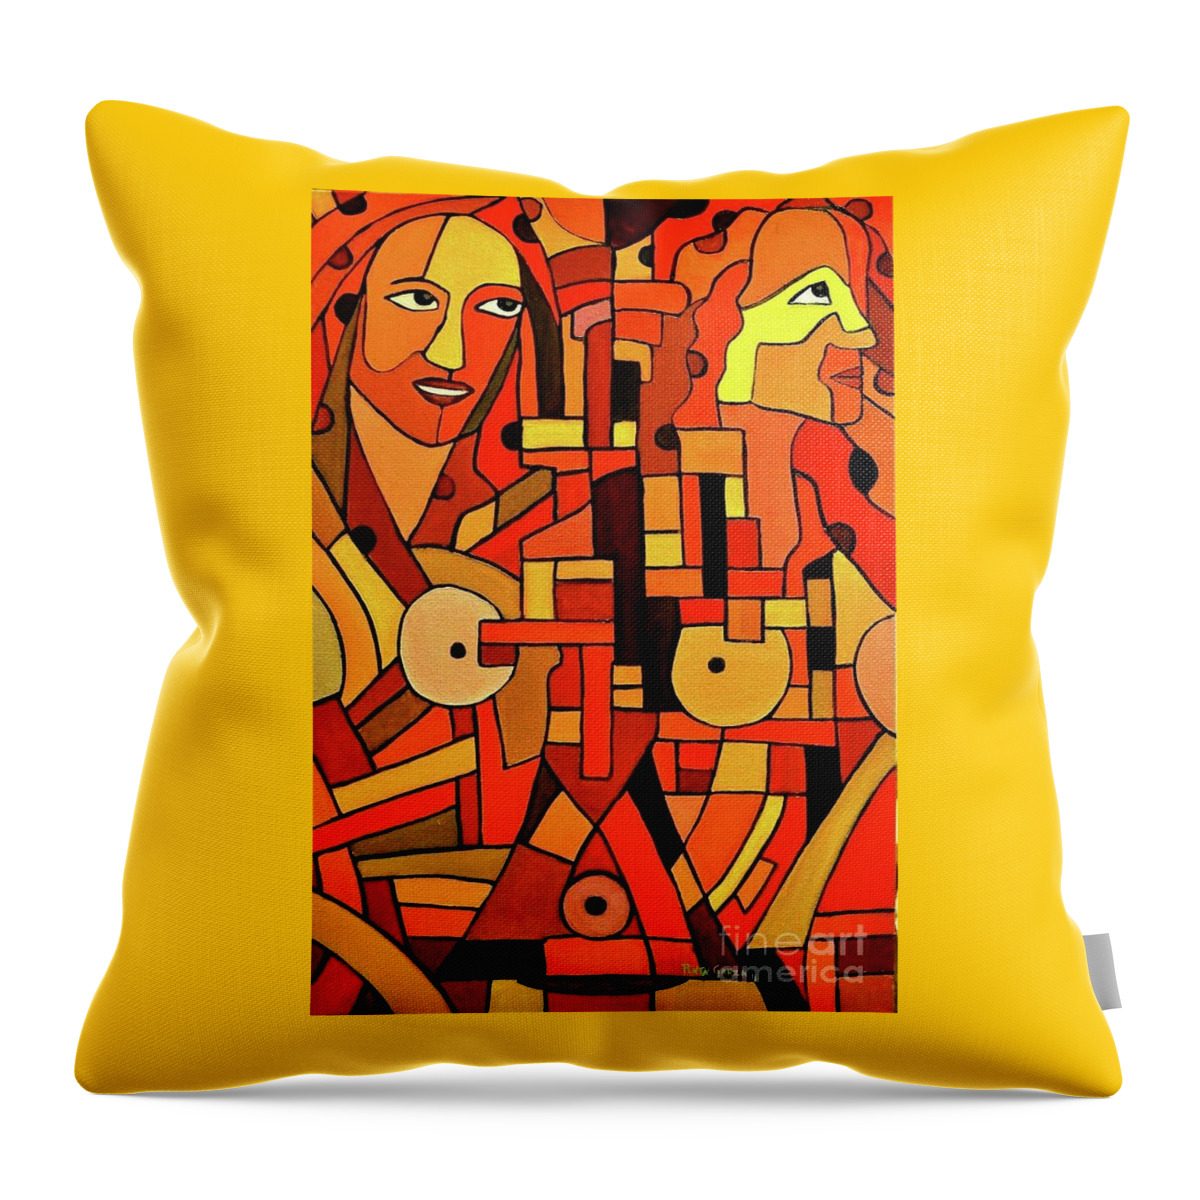 The Desire To Play In Red Throw Pillow featuring the painting The desire to play in red by Plata Garza